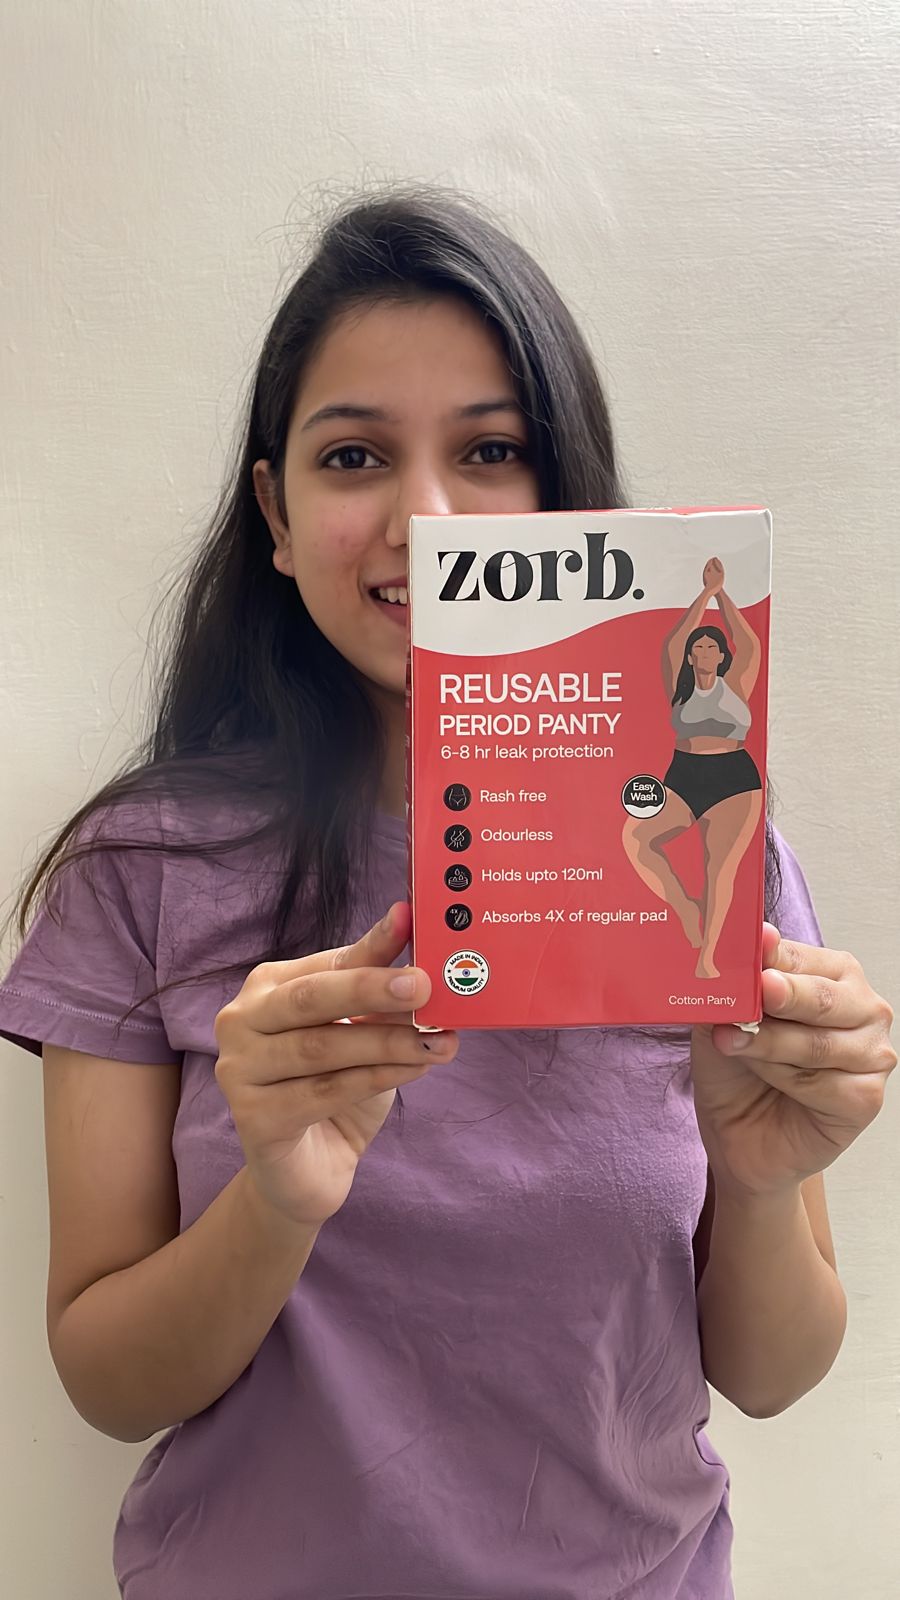 Zorb. Reusable Period Panty for Women, Comfortable Period Panties for  Women Leak Proof, Suitable for Heavy Flow, Absorbs 4X of Sanitary Pad